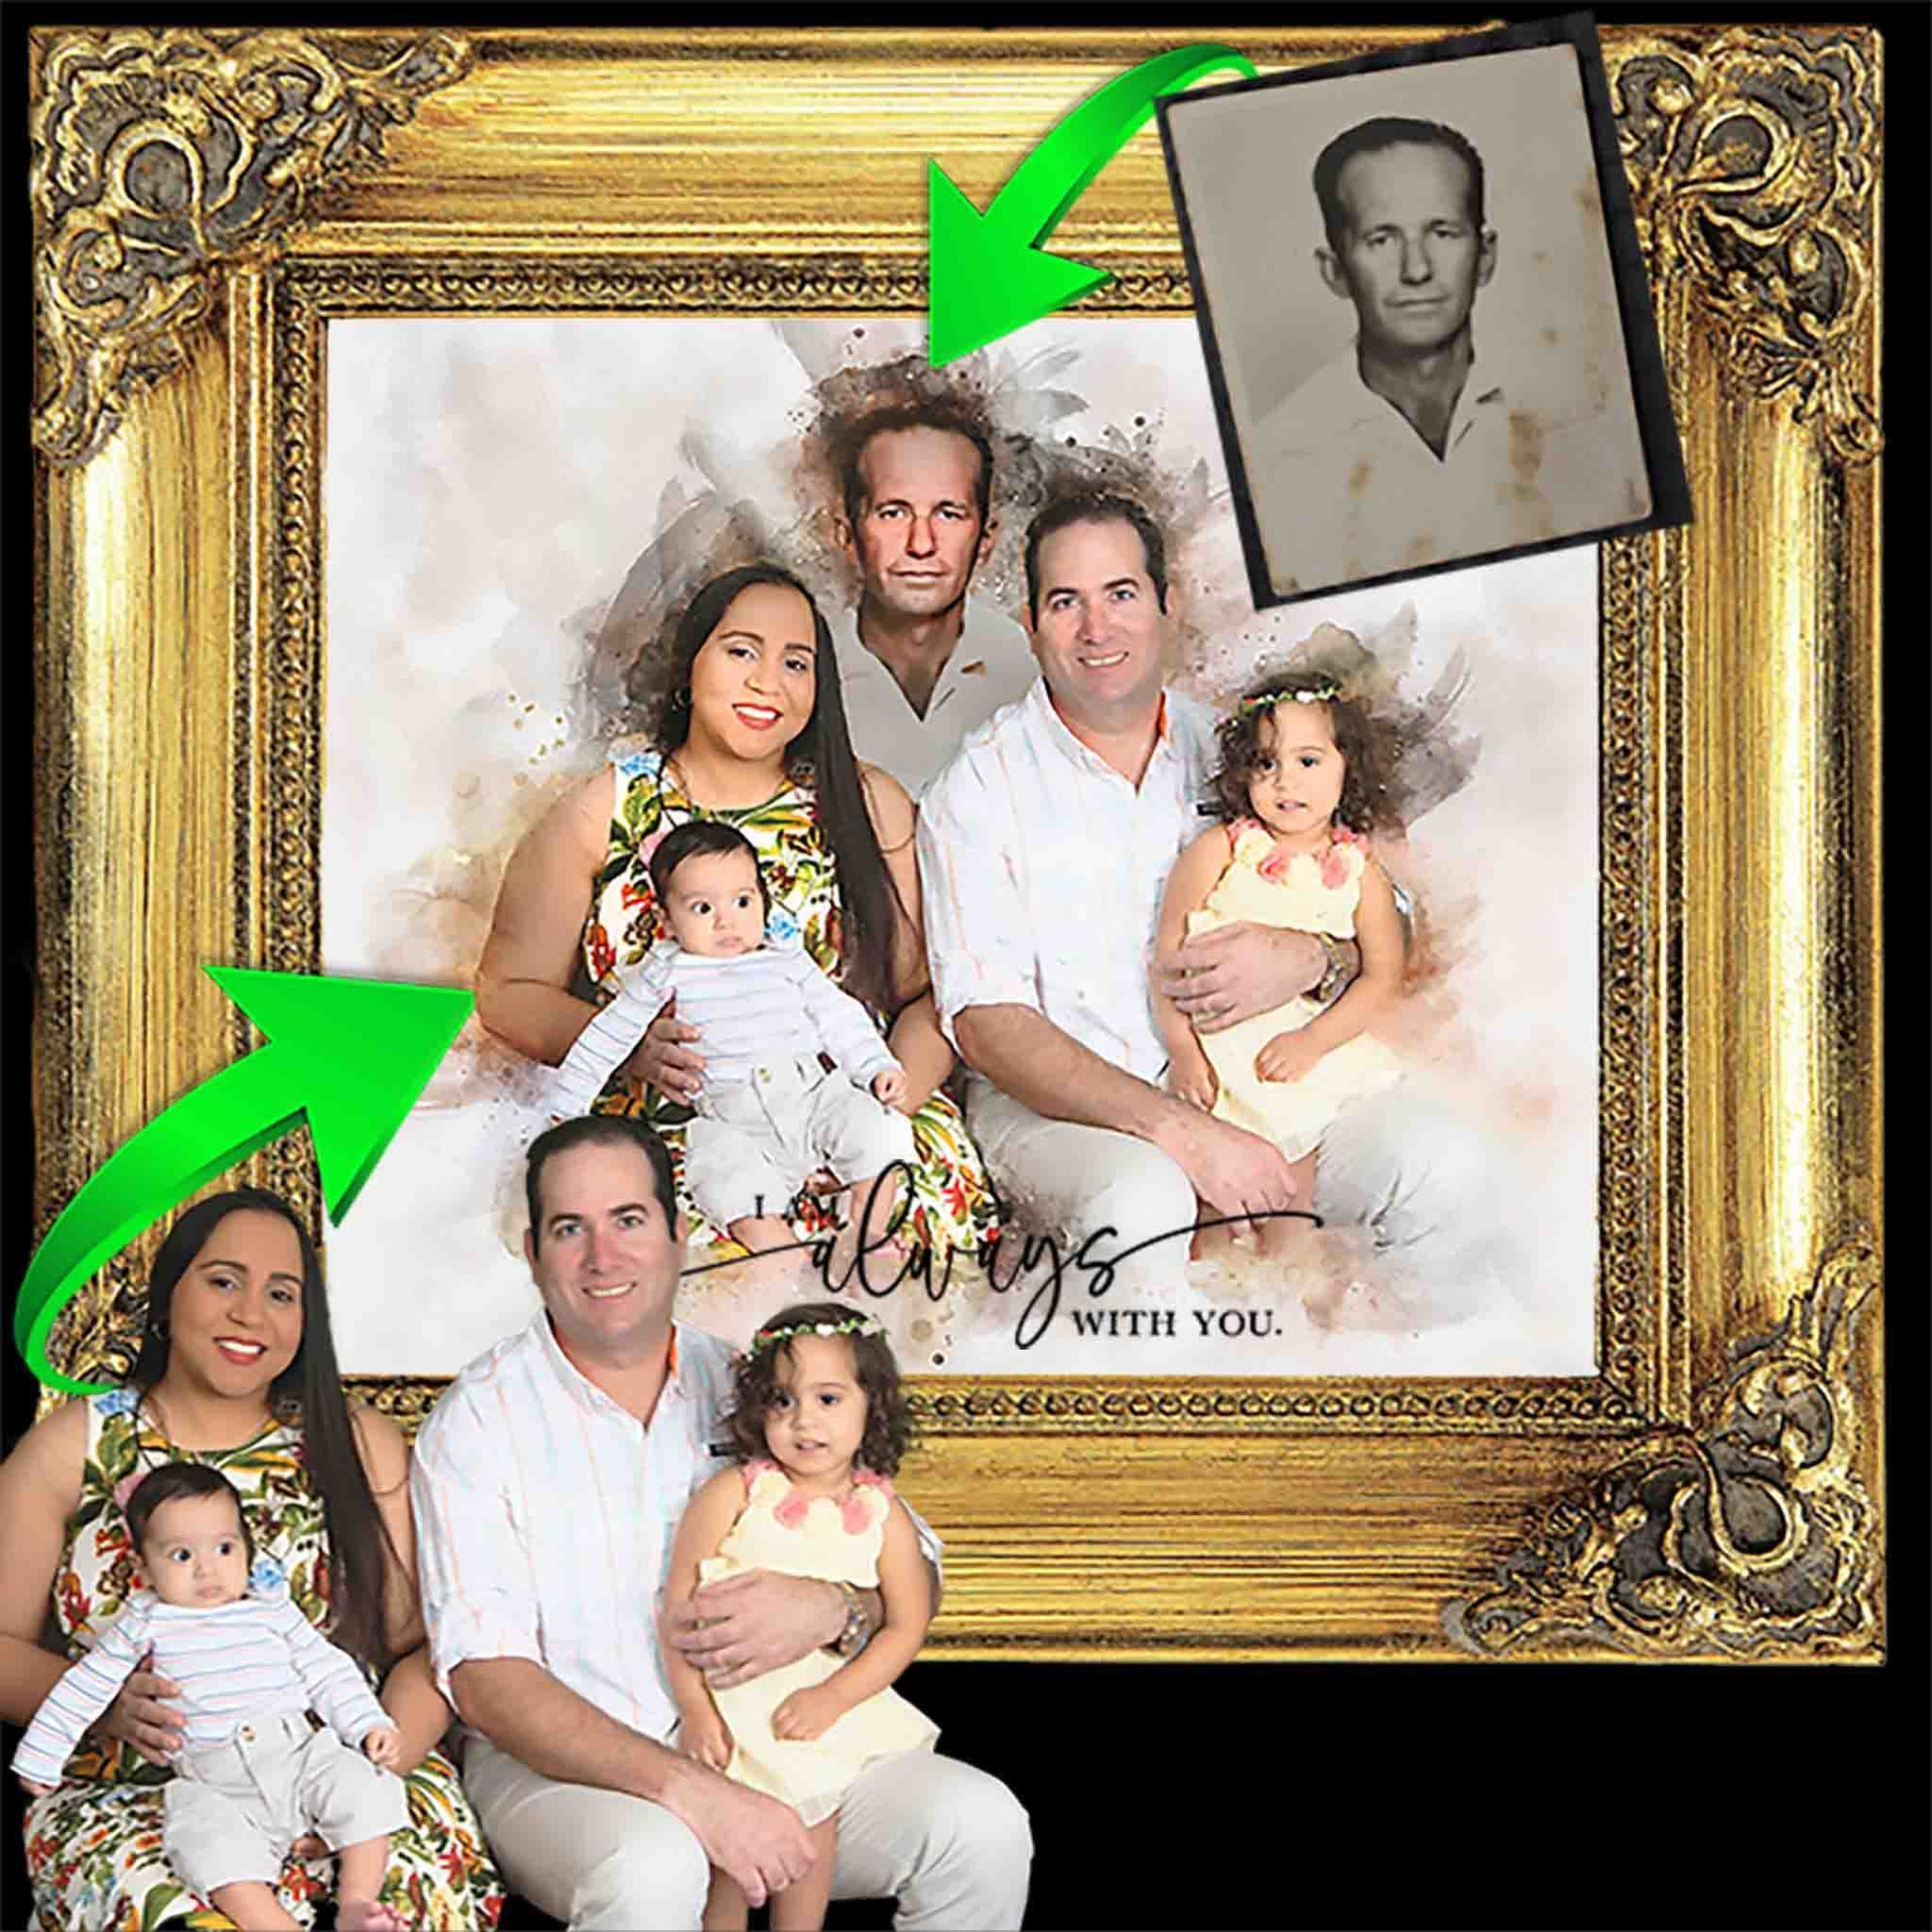 Deceased Dad added to Family Photo, Custom Paintings on Canvas - FromPicToArt